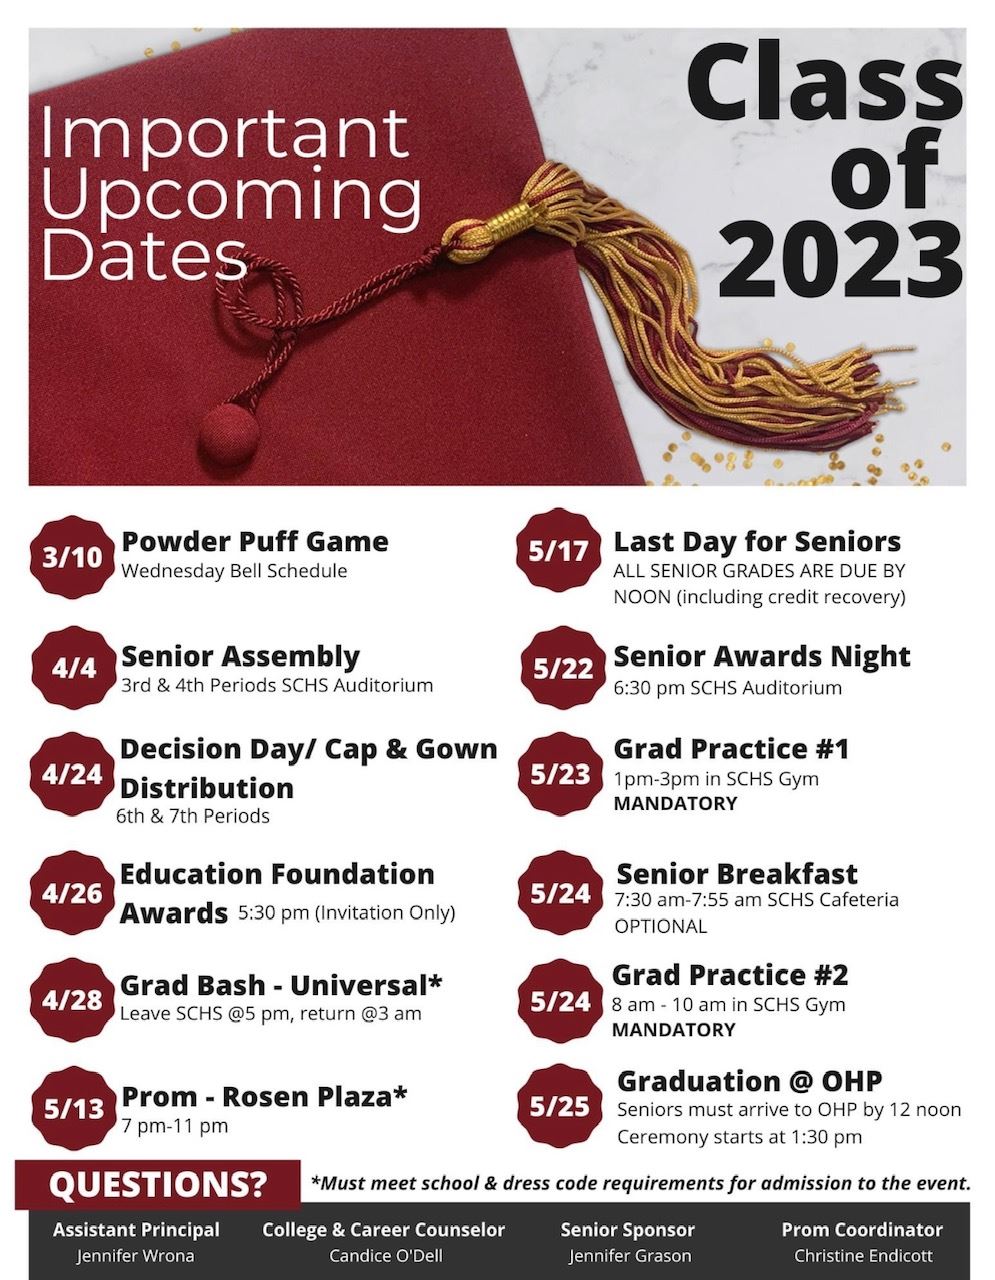  Flyer that says Important Upcoming Dates for Class of 2023